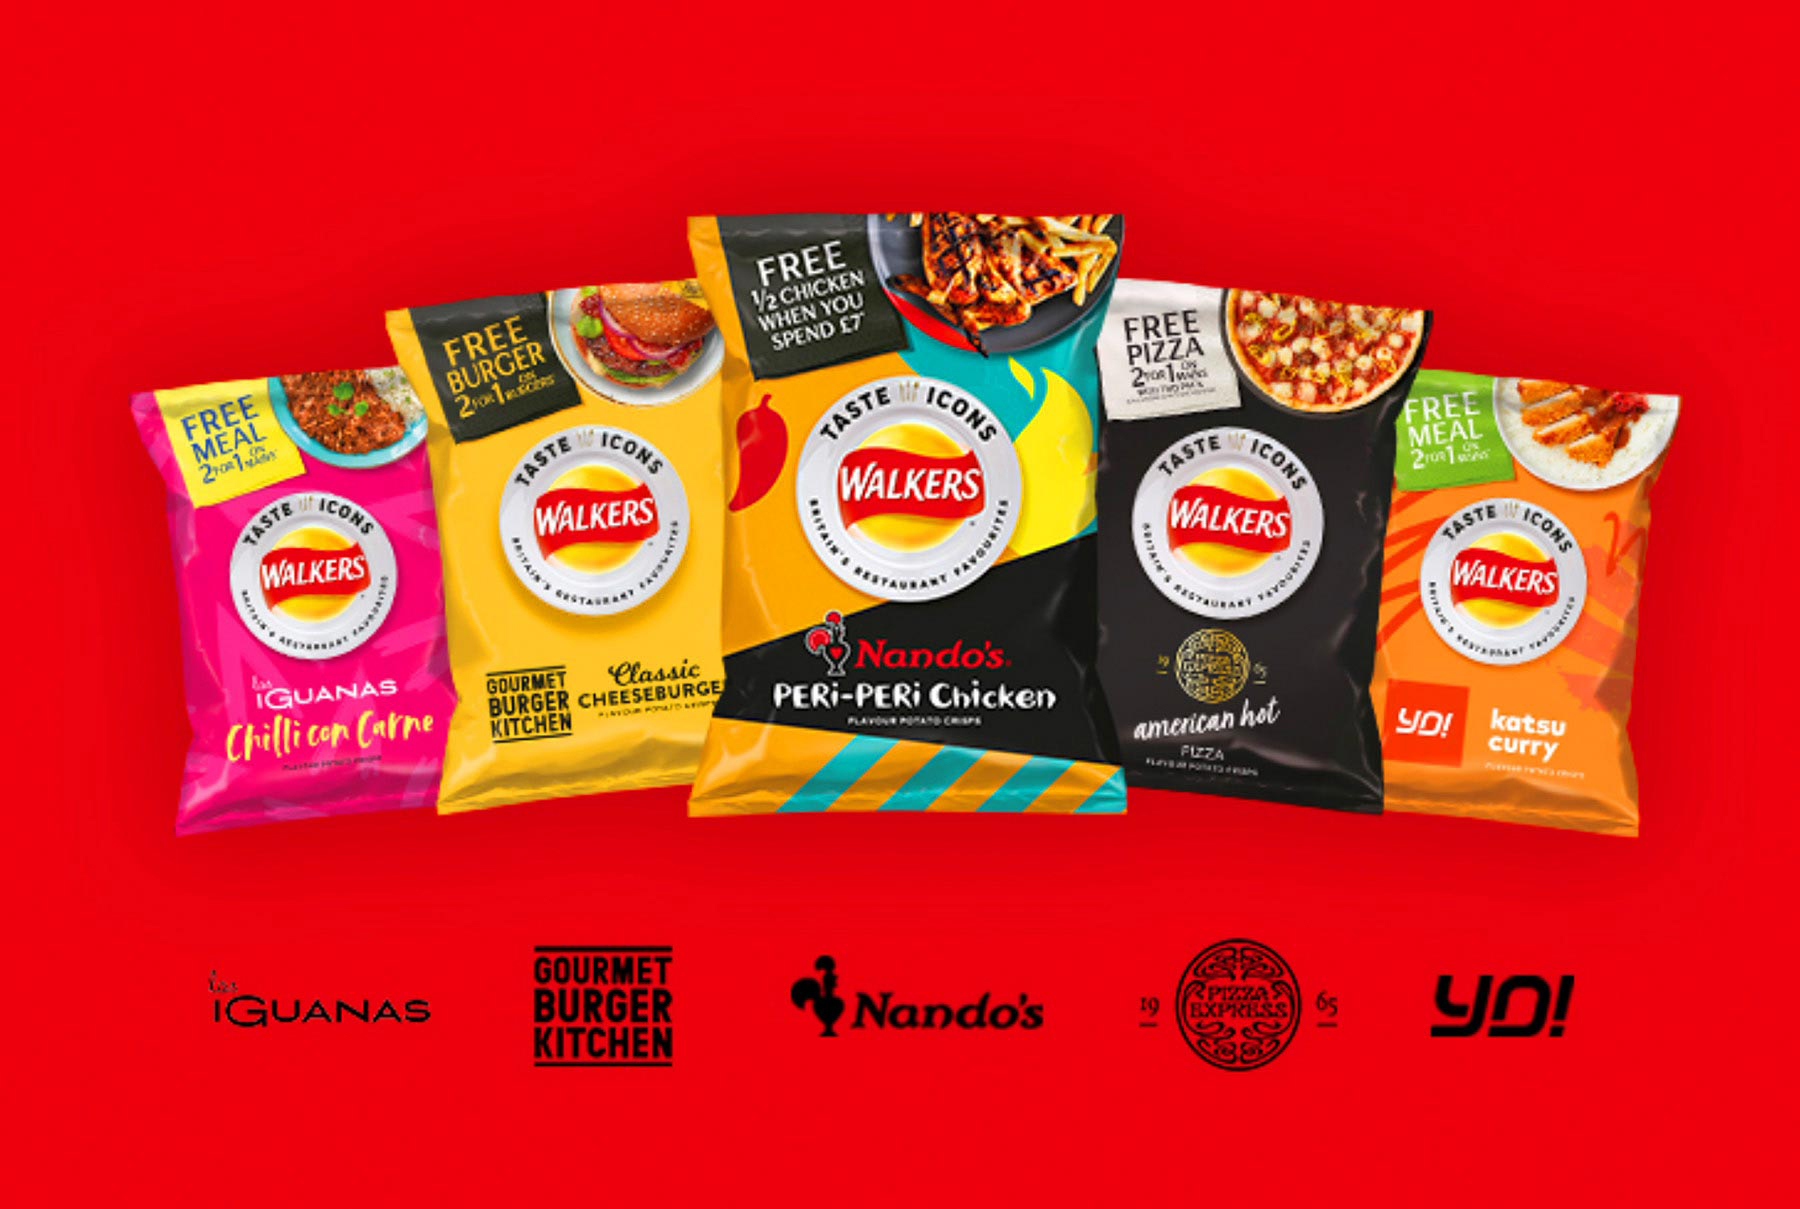 Packs of Walkers crisps with restaurant flavours